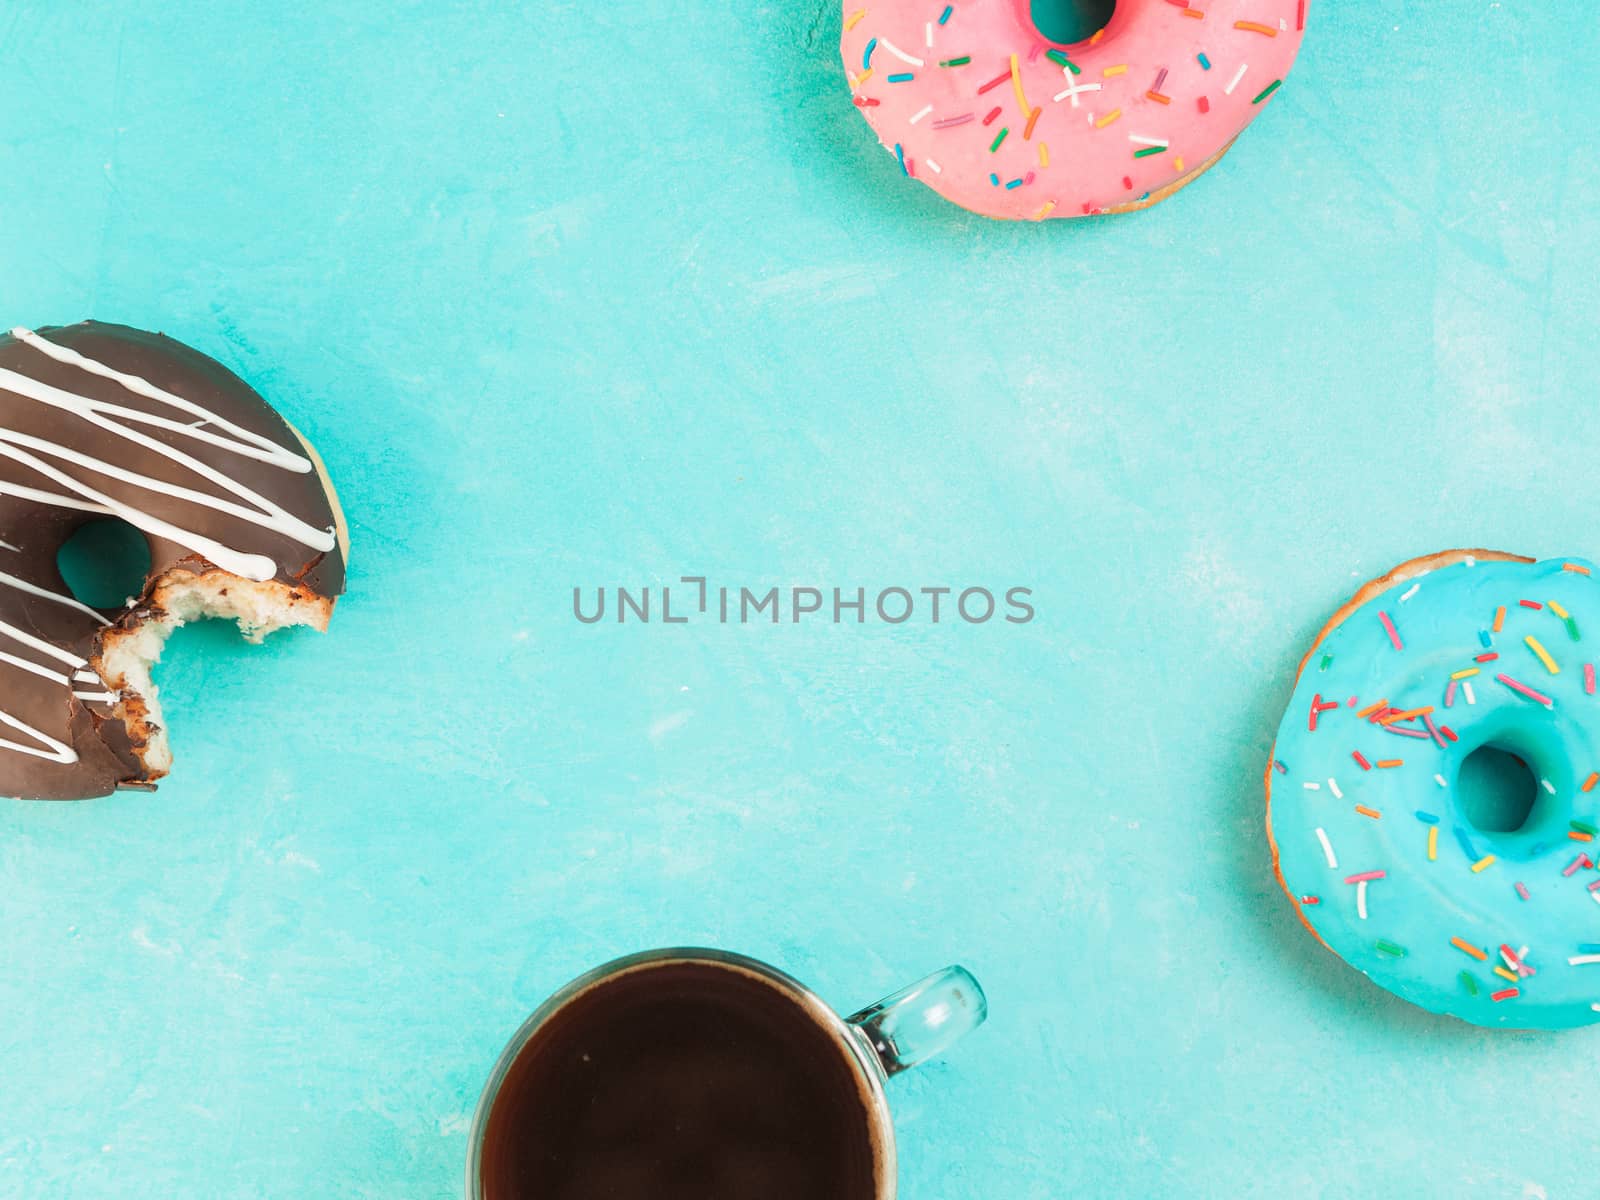 Top view of assorted donuts and coffee on blue concrete background with copy space. Colorful donuts and coffee background. Various glazed doughnuts with sprinkles.